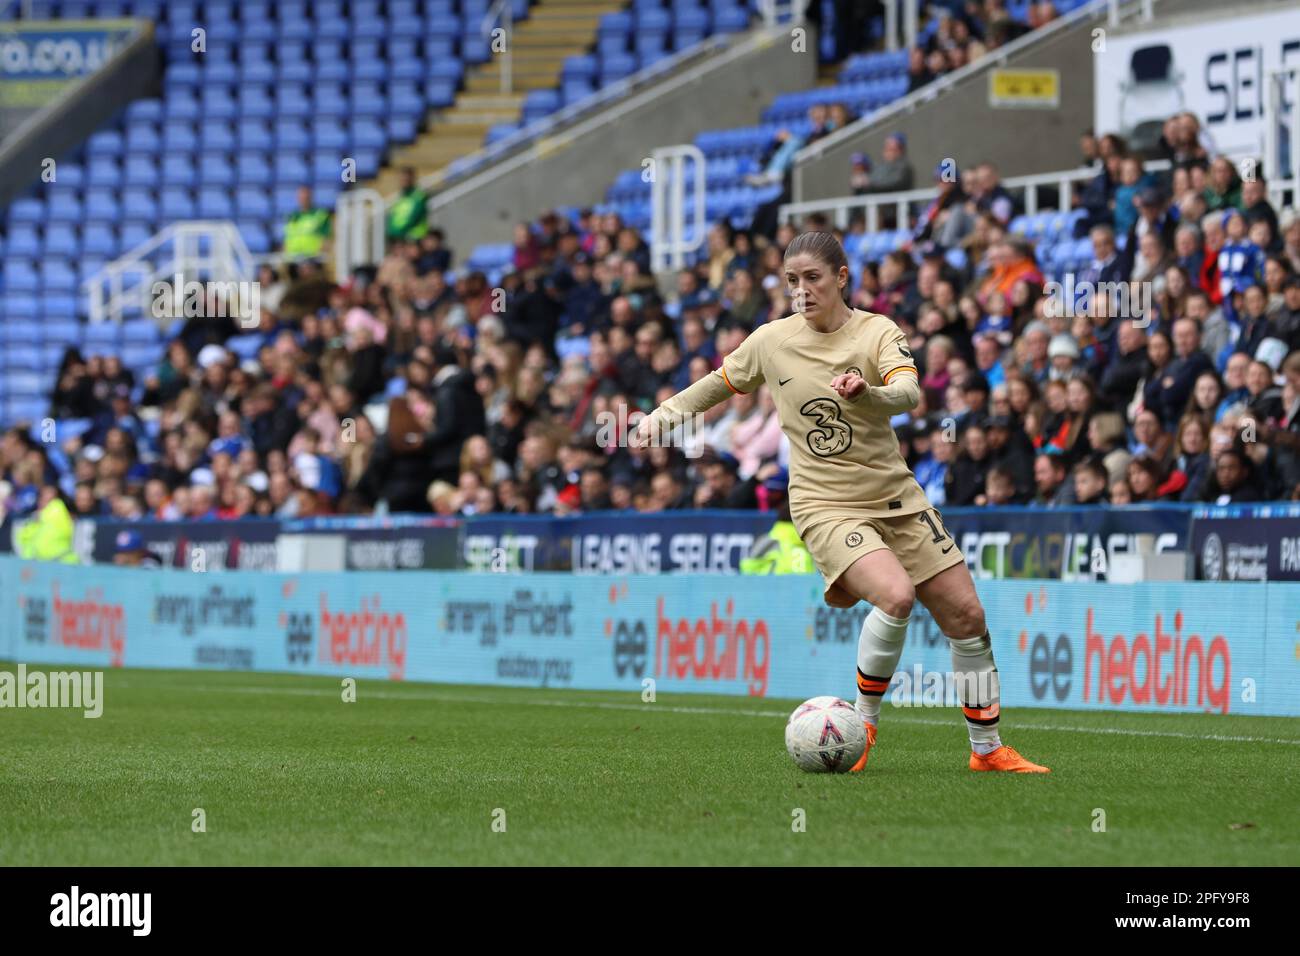 Reading, UK. 19th Mar, 2023. The Select Car Leasing Stadium, Reading, UK, March 19, 2023 Maren Mjelde (CHE, m 18) during the quarter final of the Vitality Women's FA Cup, 19 March 2023, between Reading and Chelsea at The Select Car Leasing Stadium, Reading, UK (Bettina Weissensteiner/SPP) Credit: SPP Sport Press Photo. /Alamy Live News Stock Photo